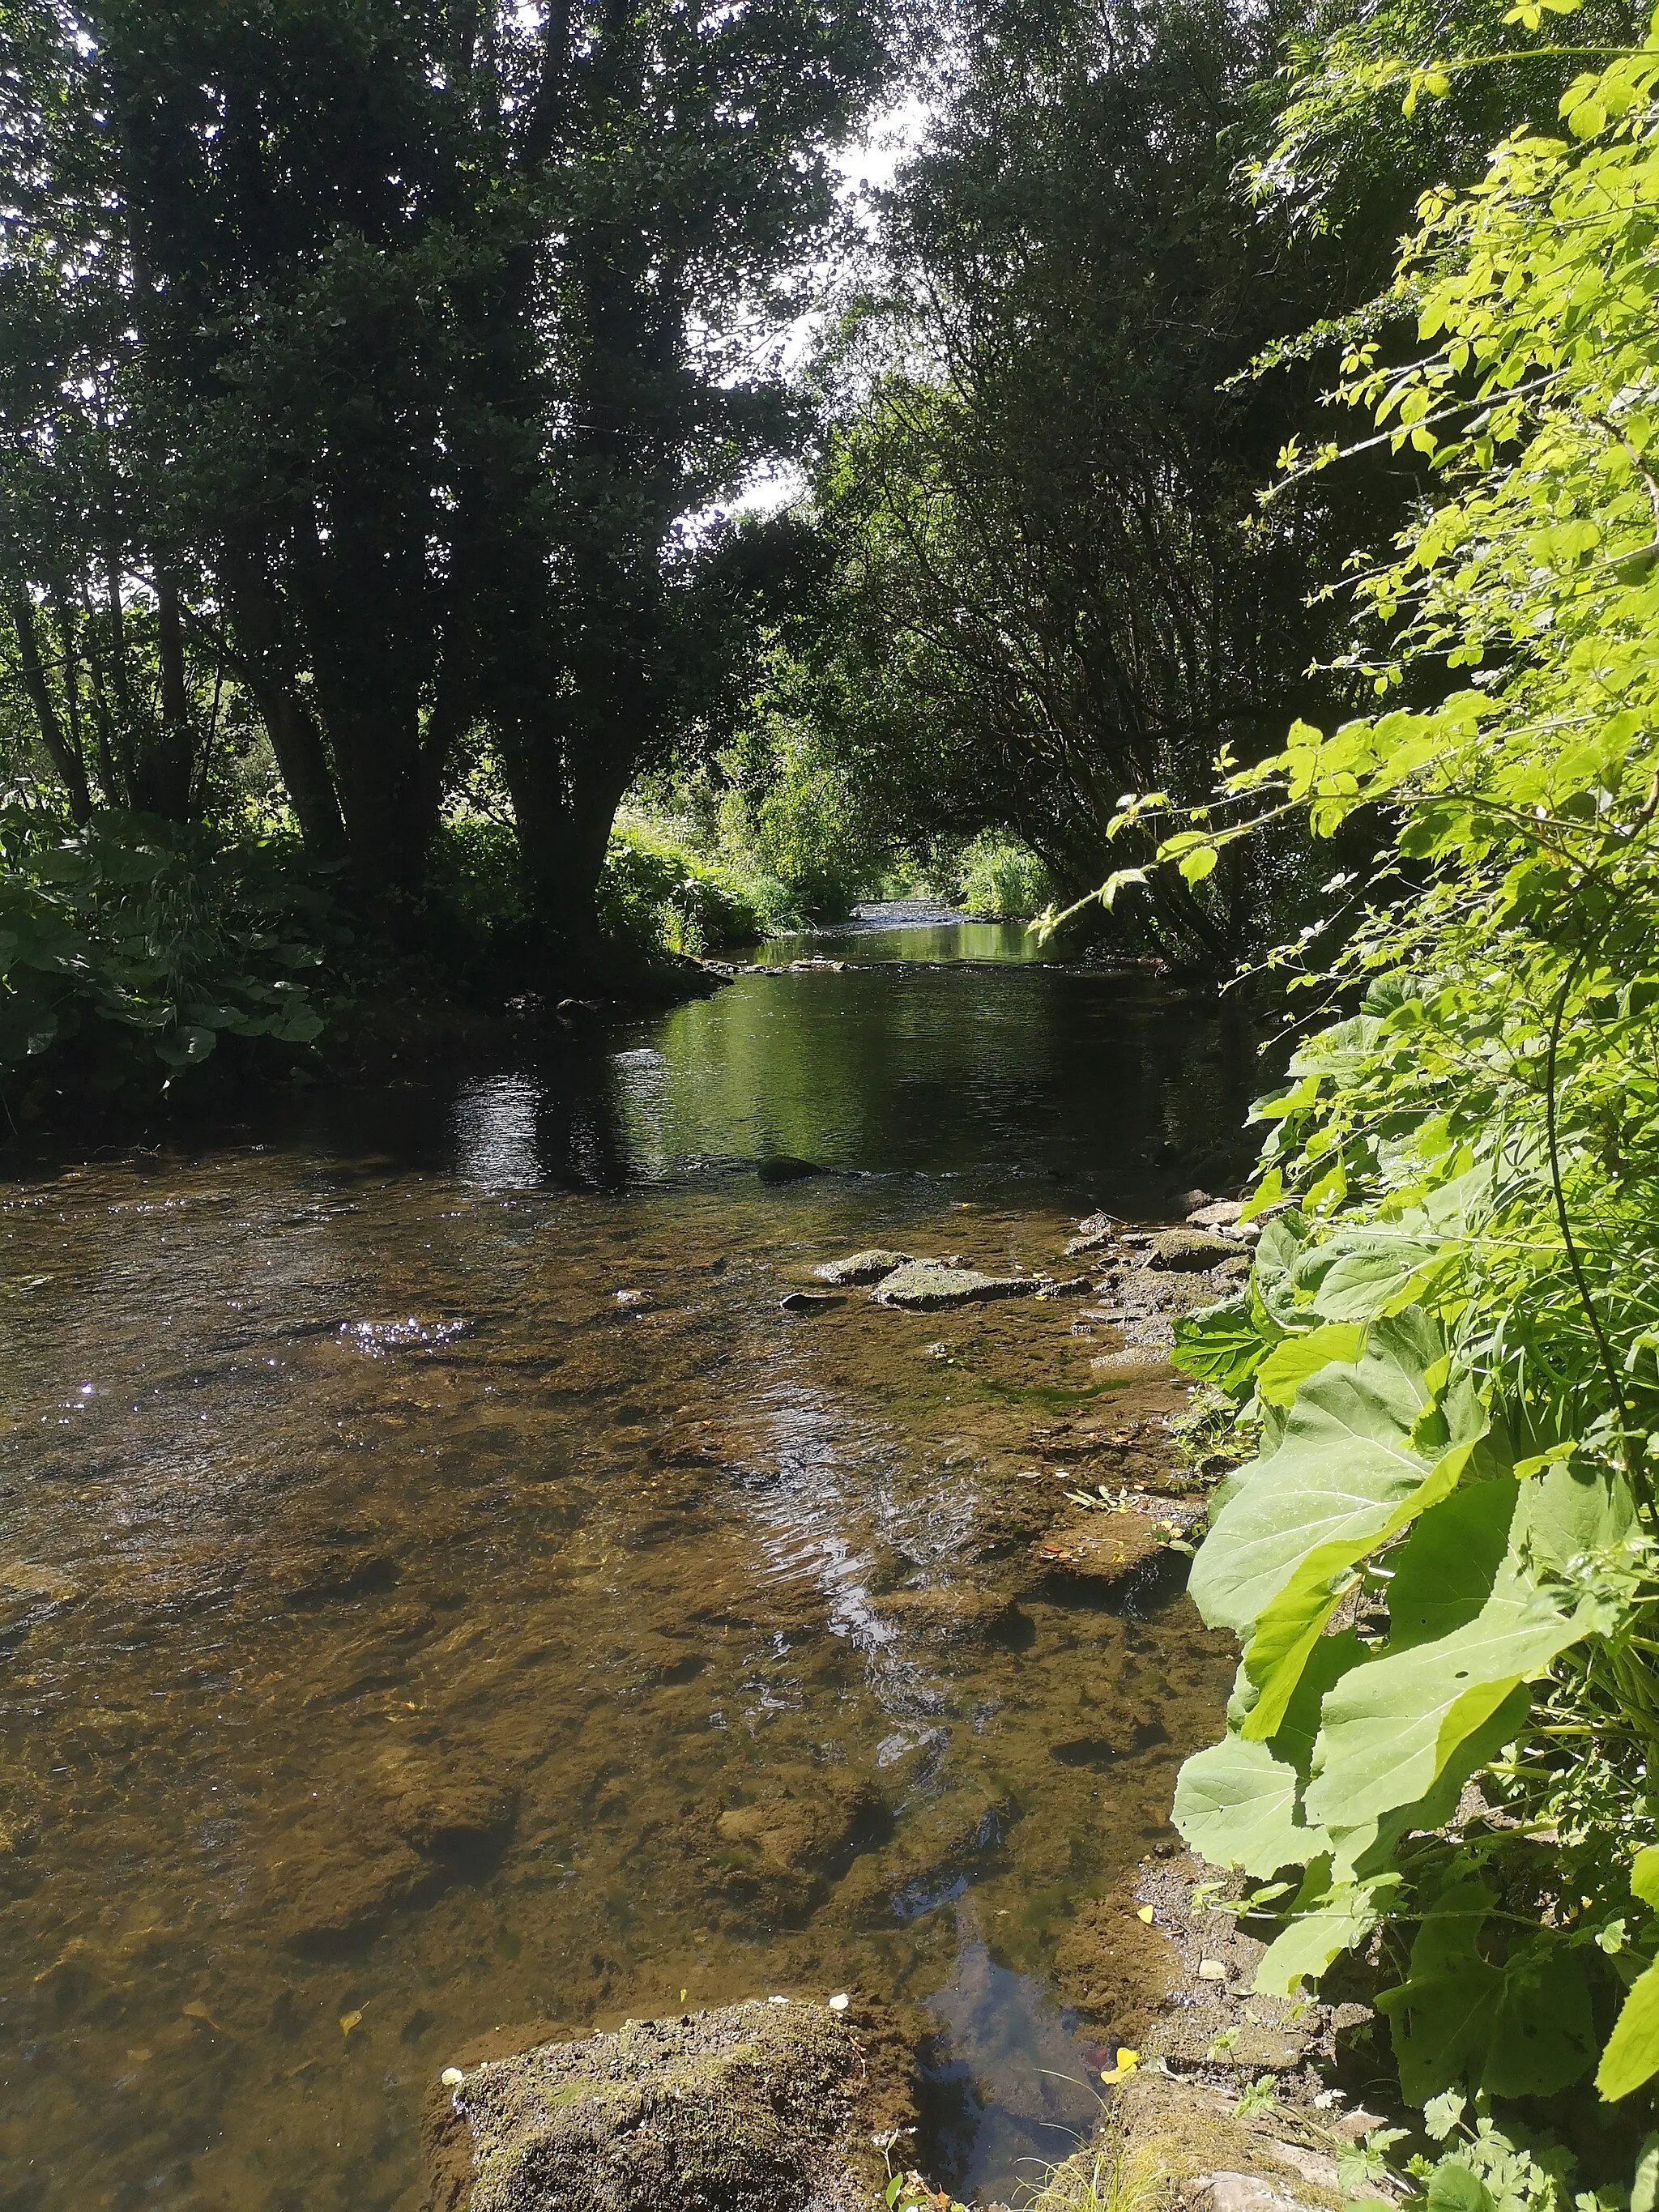 Photo showing: A shallow section of the Rye River Special Area of Conservation close to the Leixlip Aqueduct which carries the Royal Canal and train lines to the west over the Rye Water or Rye River